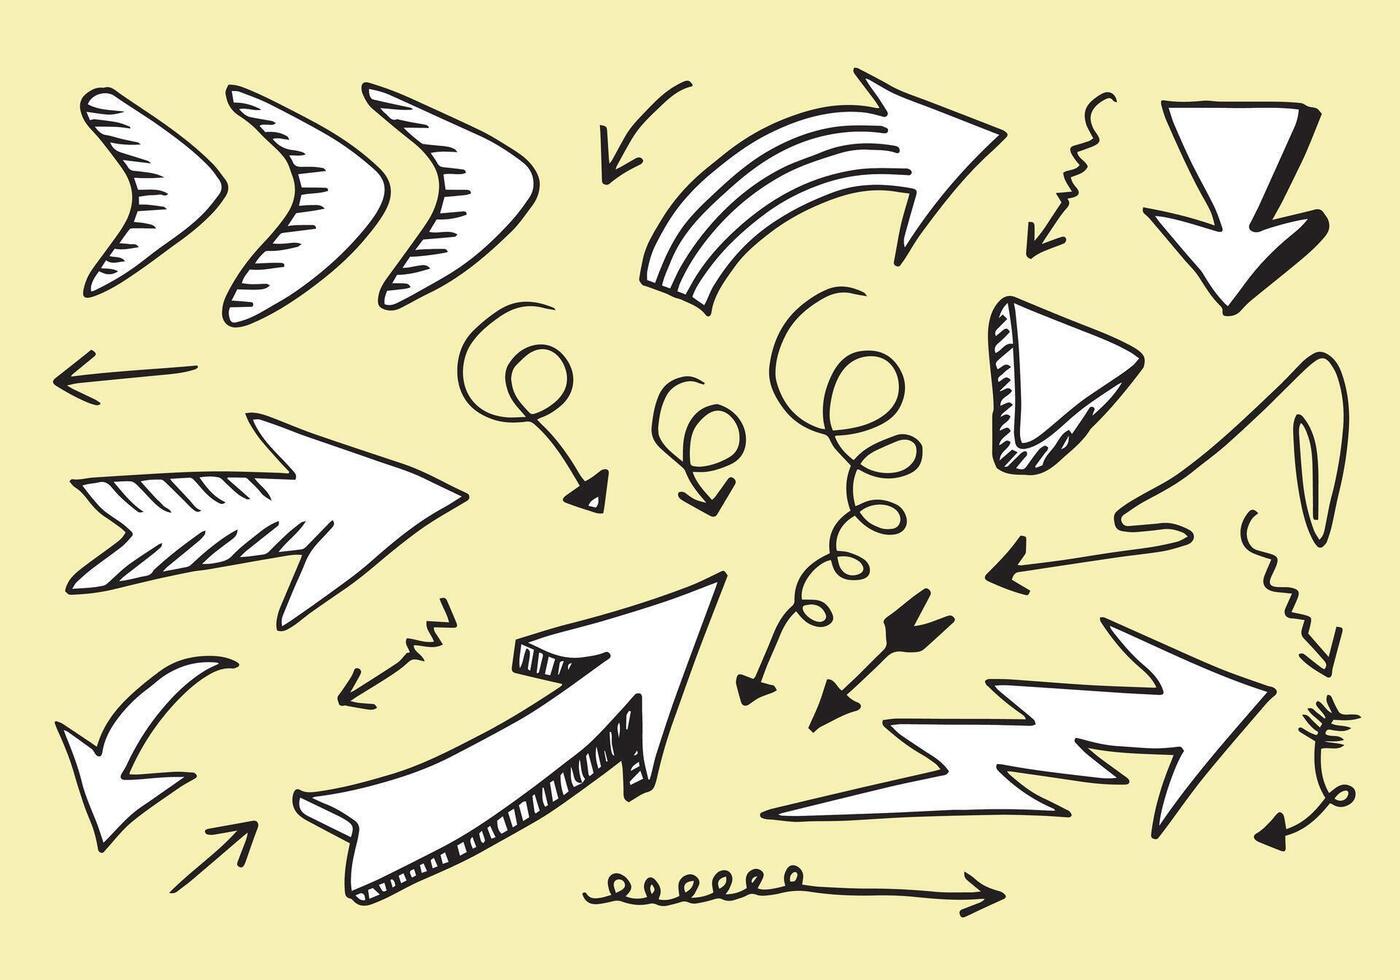 doodle design elements. hand drawn arrows isolated on yellow background. vector